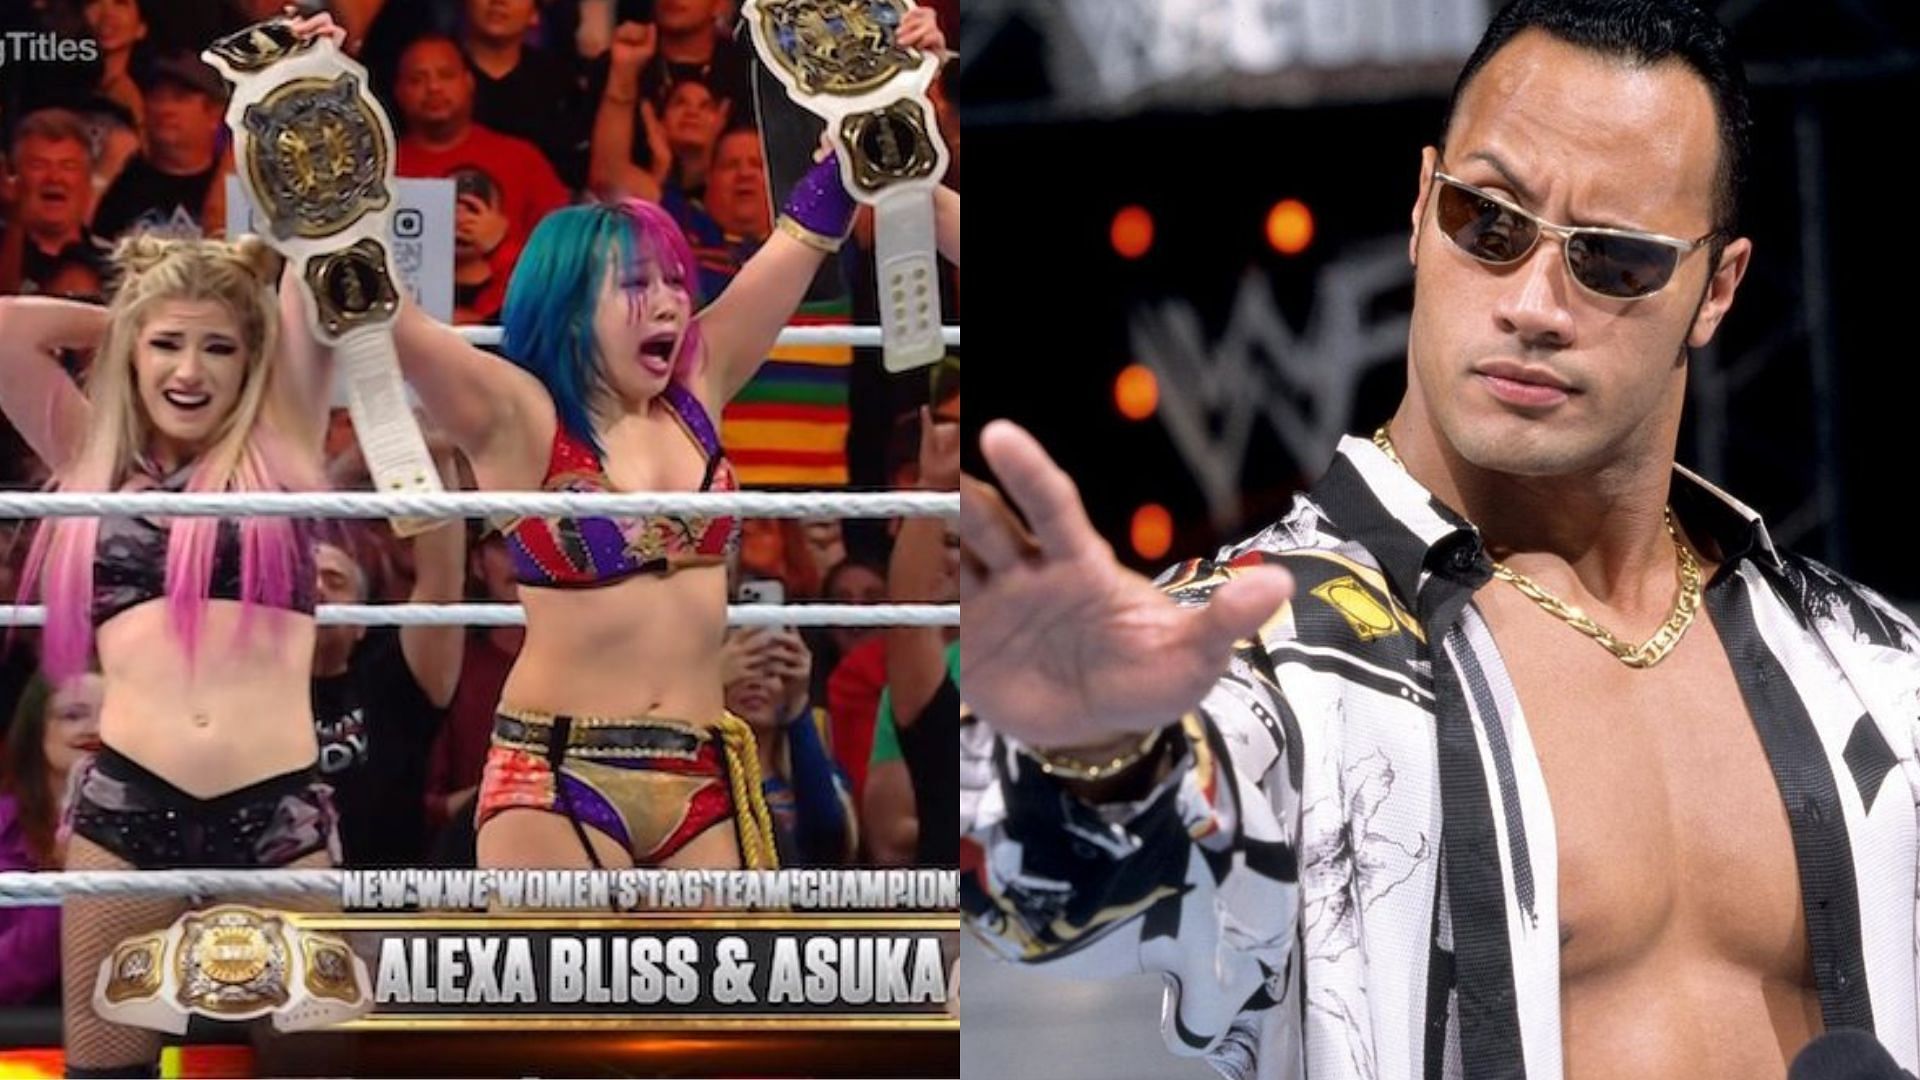 Vince Russo compared Alexa Bliss and Asuka